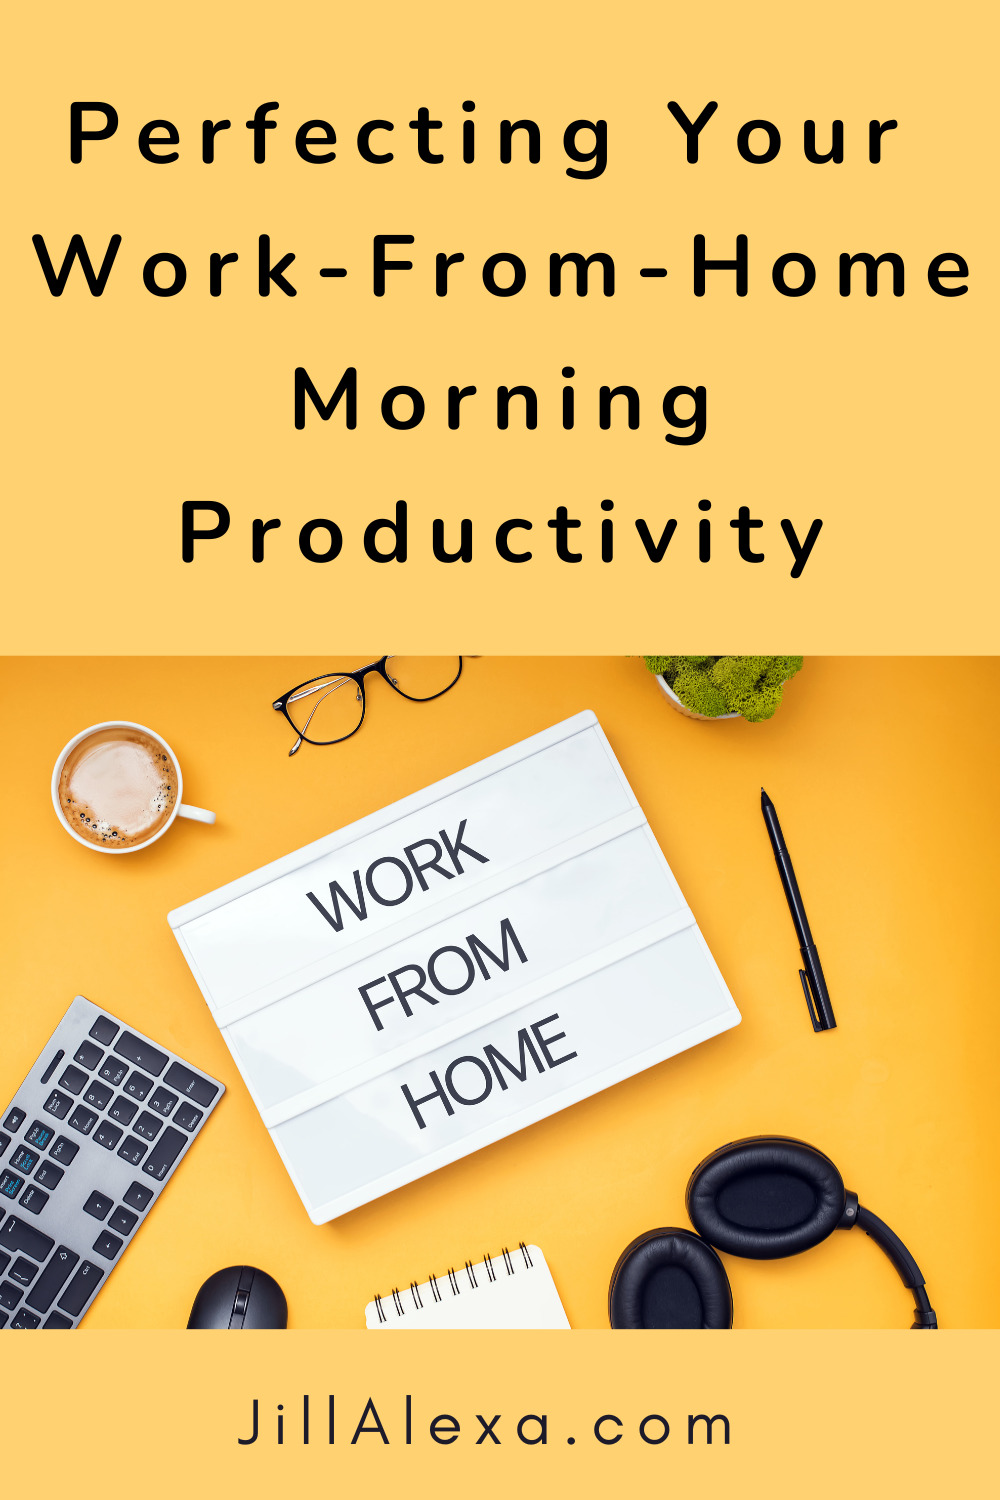 Perfecting Your Work-From-Home Morning Productivity | Work From Home Morning Productivity Pin